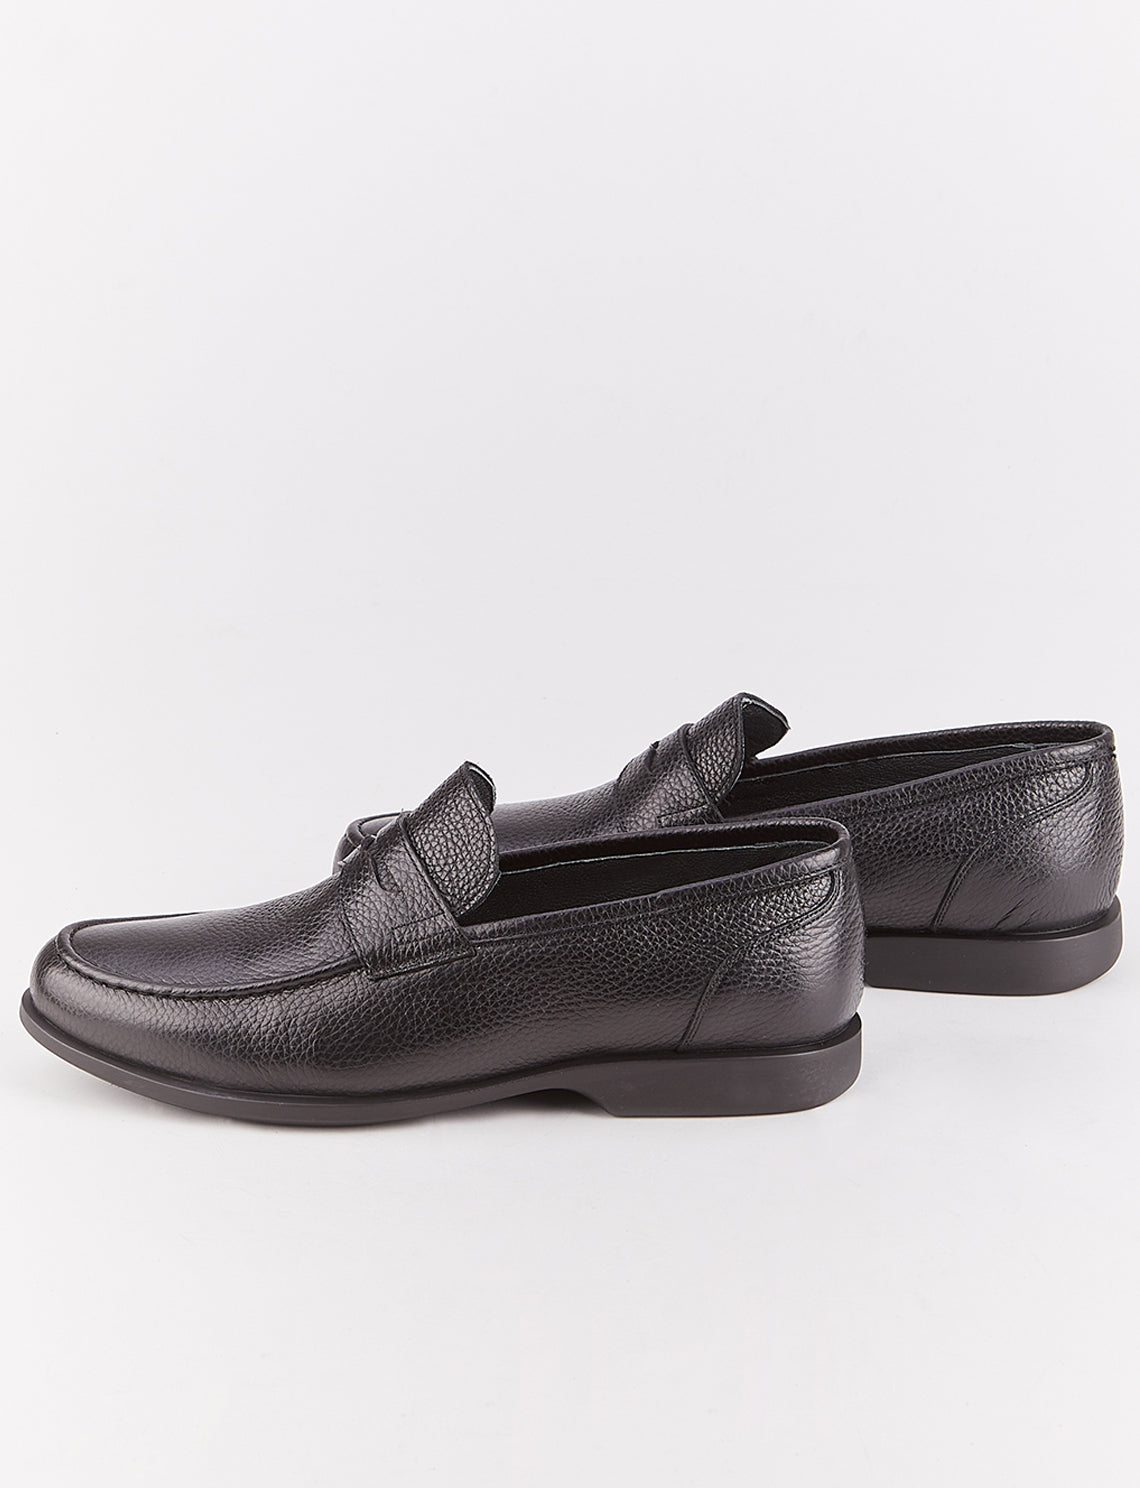 Men Black Genuine Leather Round Toe Penny Loafers